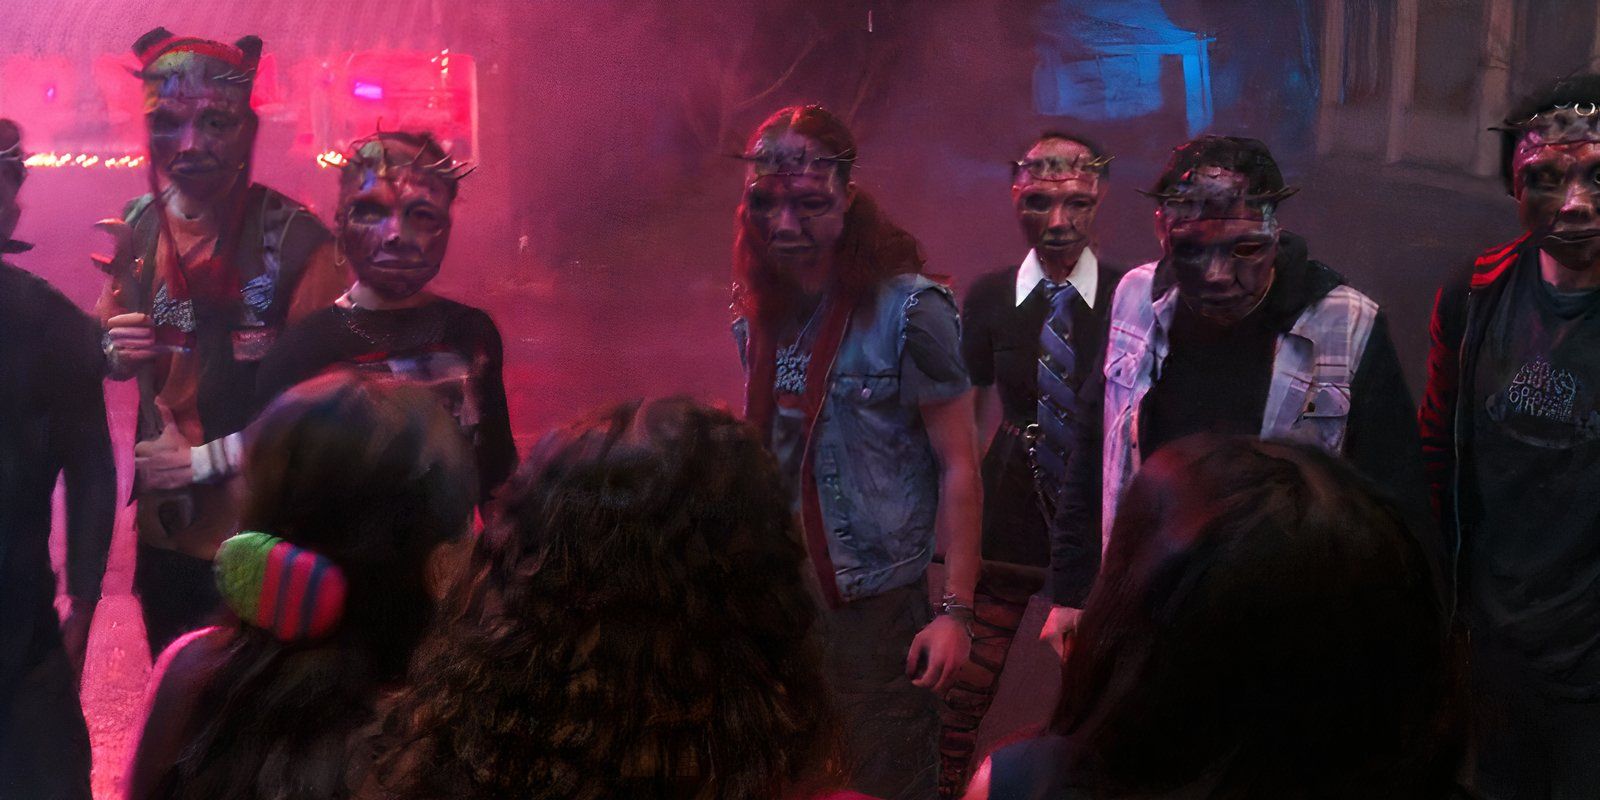 A mob of masked people stand in front of the Liars in Pretty Little Liars Summer School